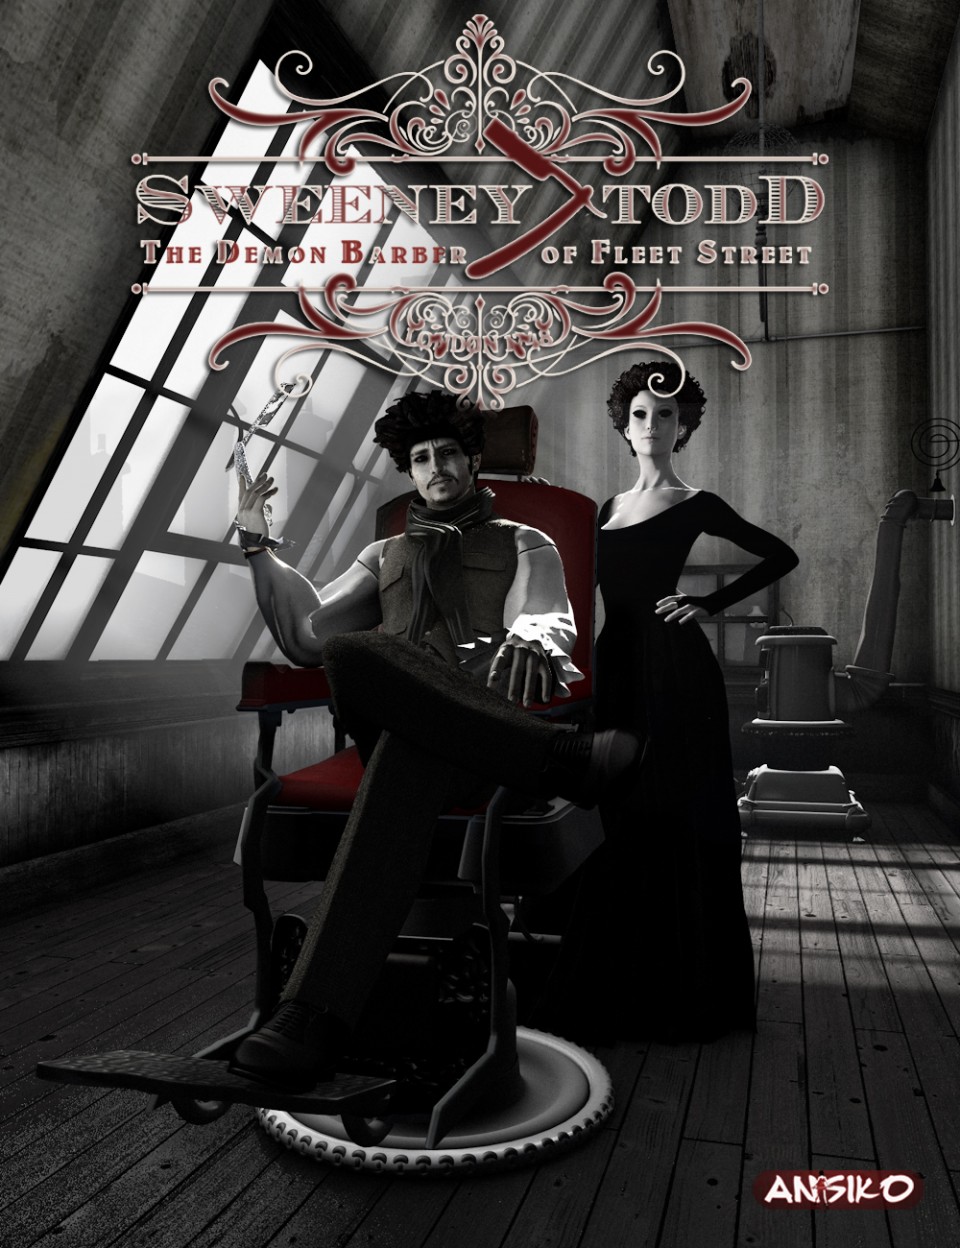 Sweeney todd soundtrack download free music